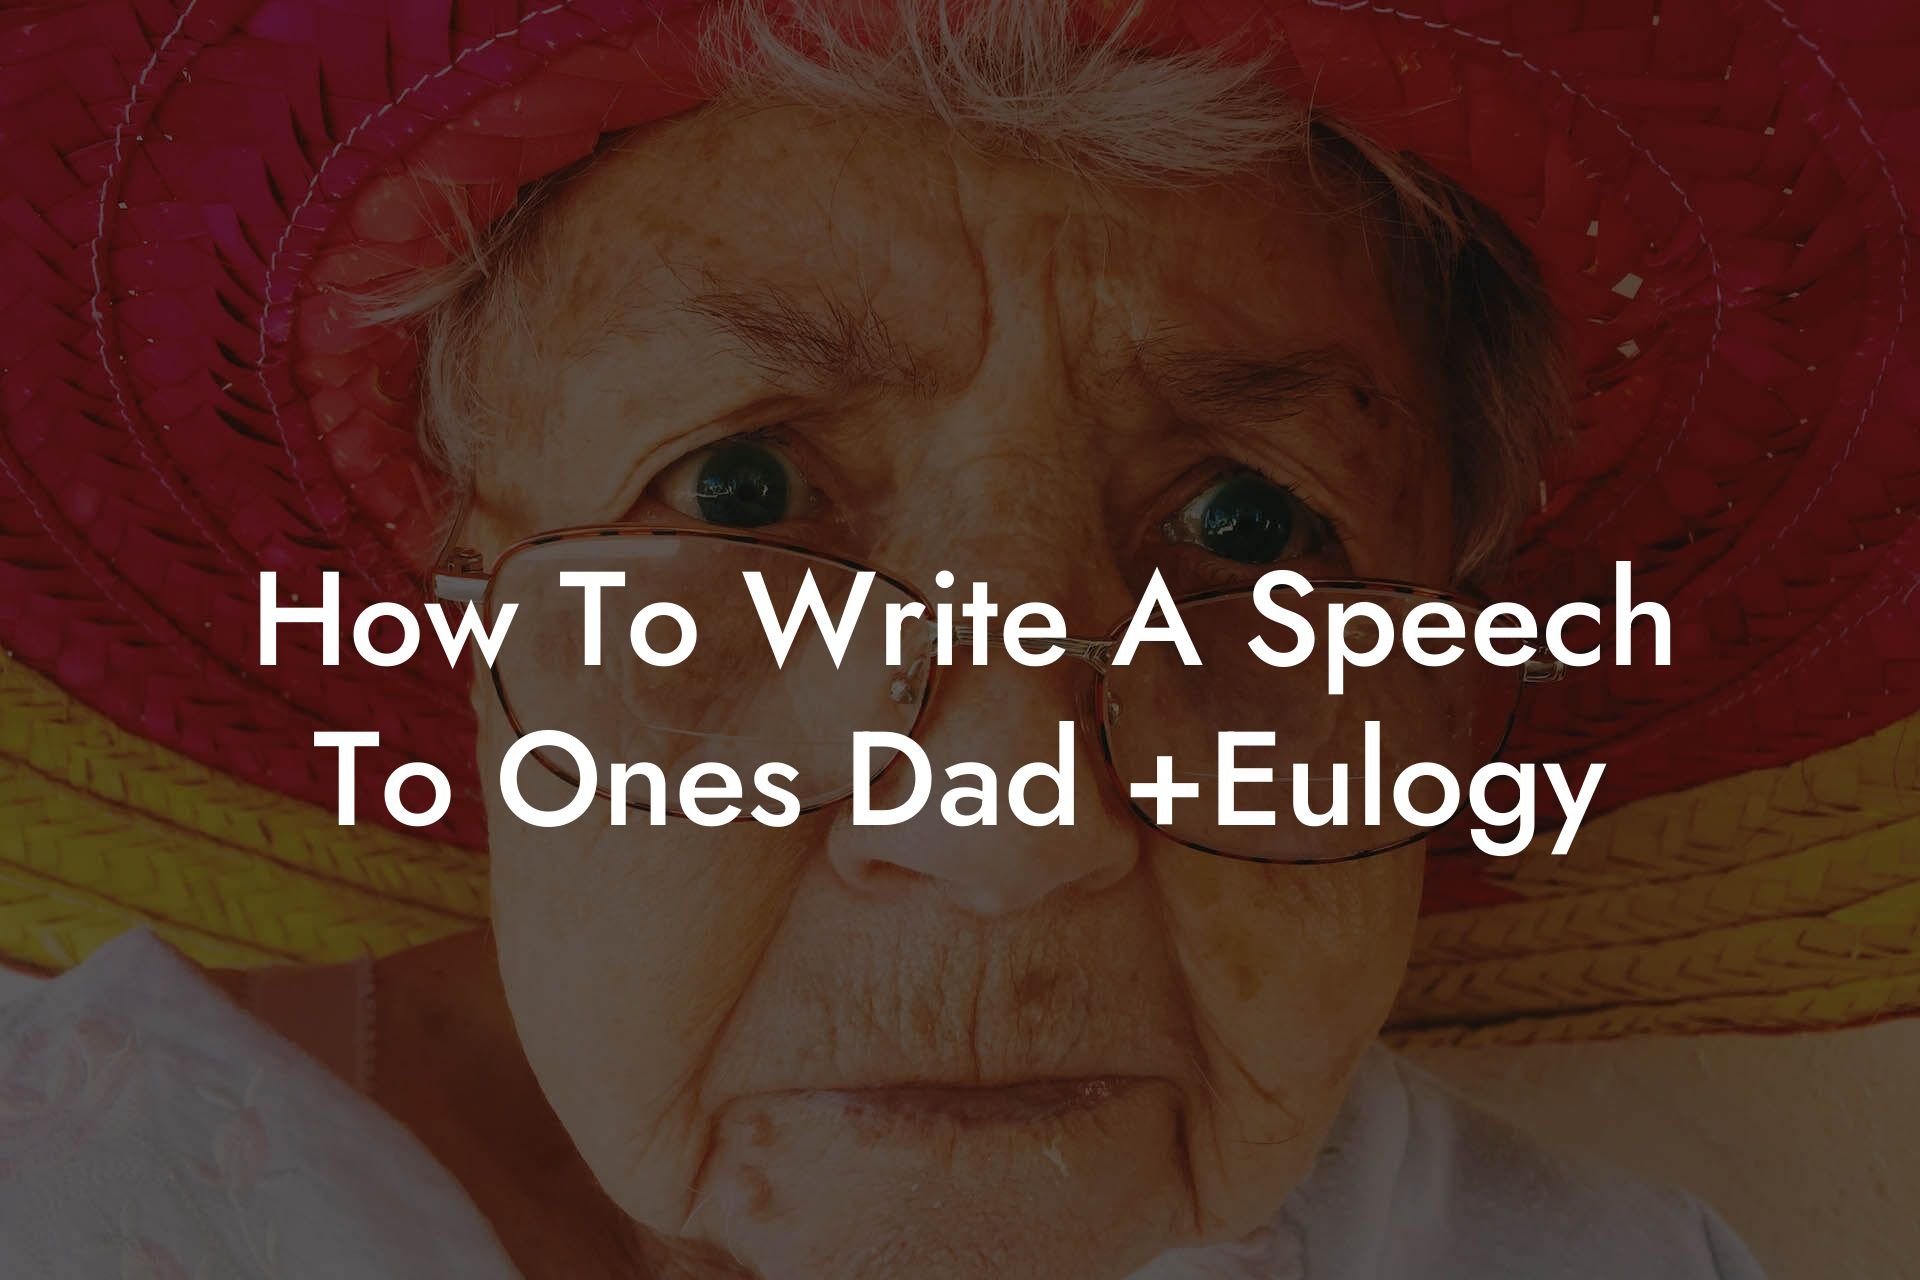 How To Write A Speech To Ones Dad +Eulogy